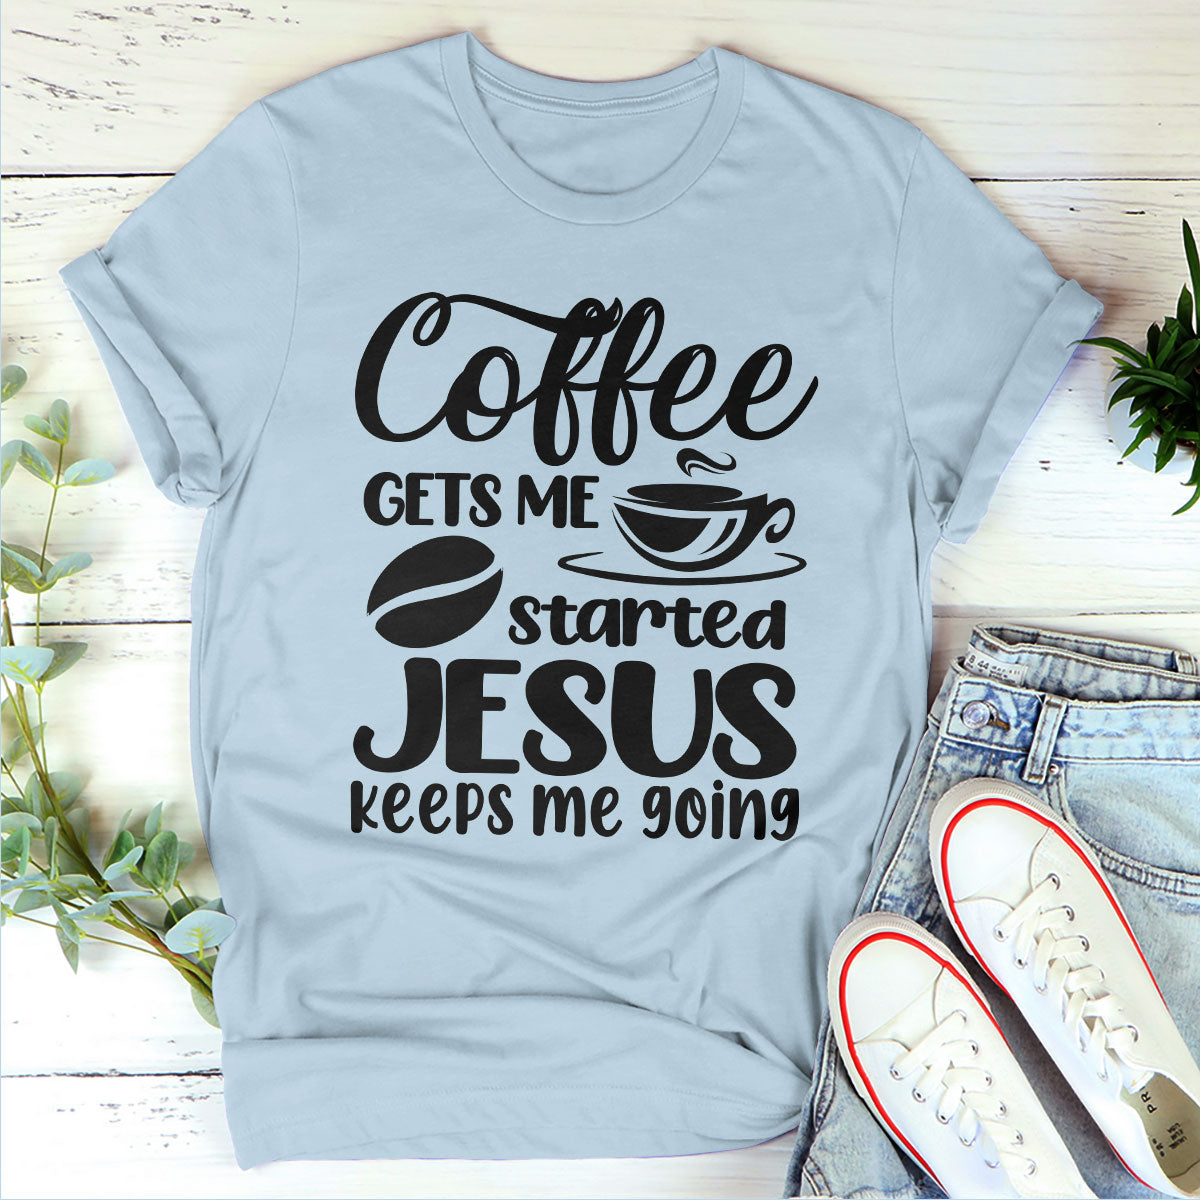 Awesome Unisex T-shirt - Coffee Gets Me Started, Jesus Keeps Me Going ...